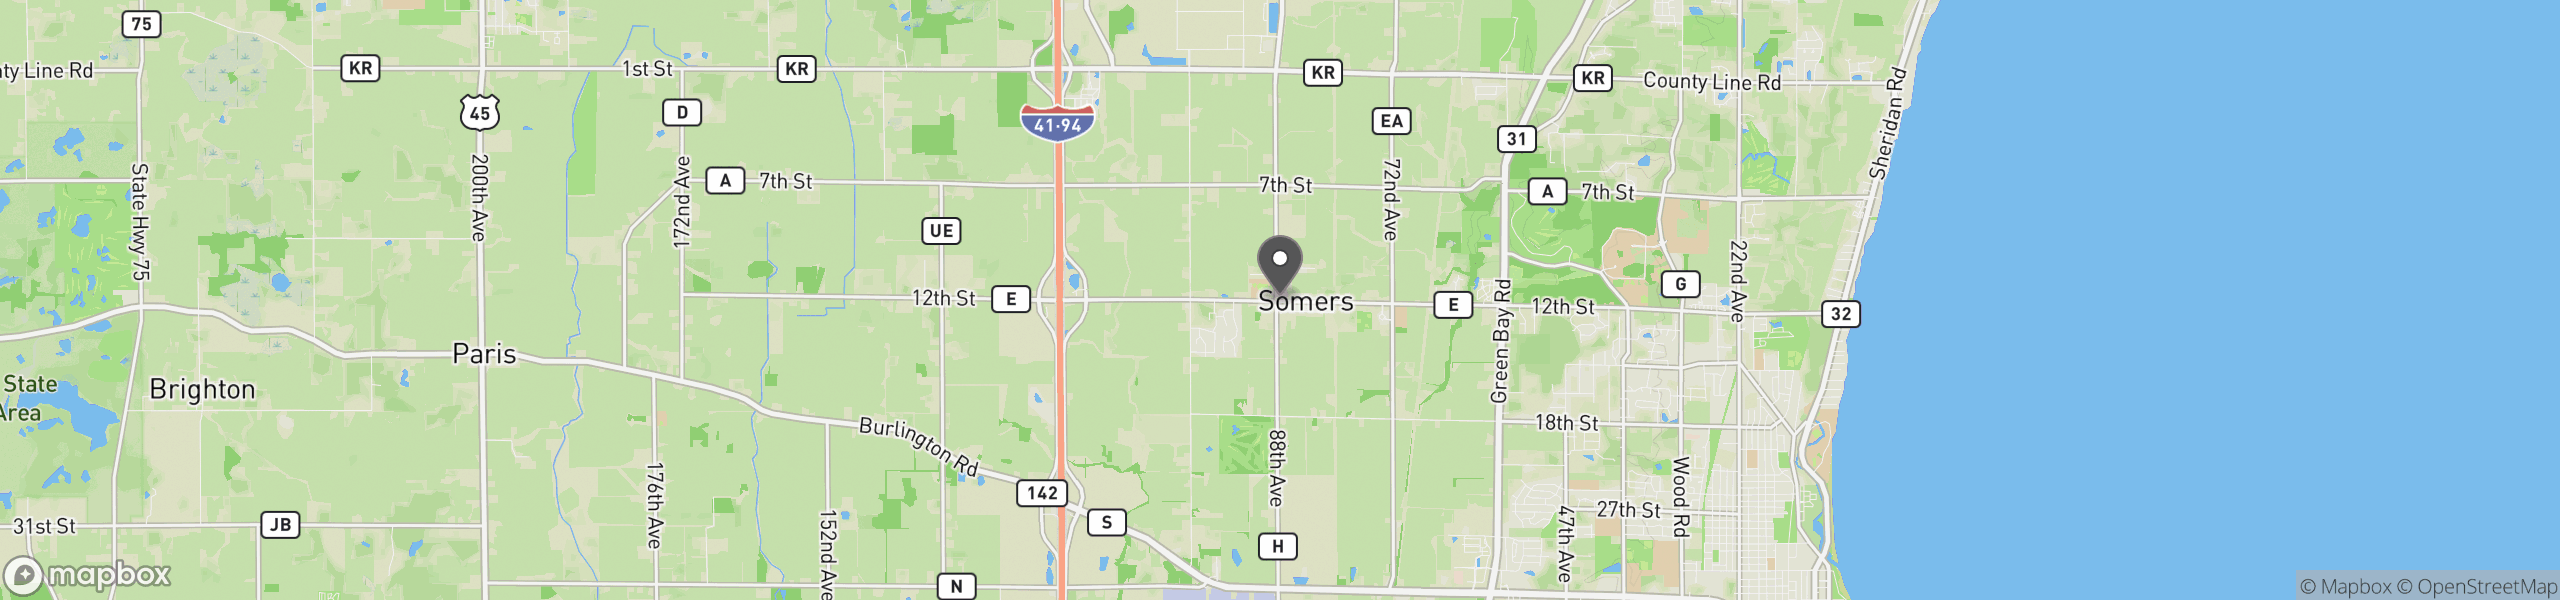 Somers, WI